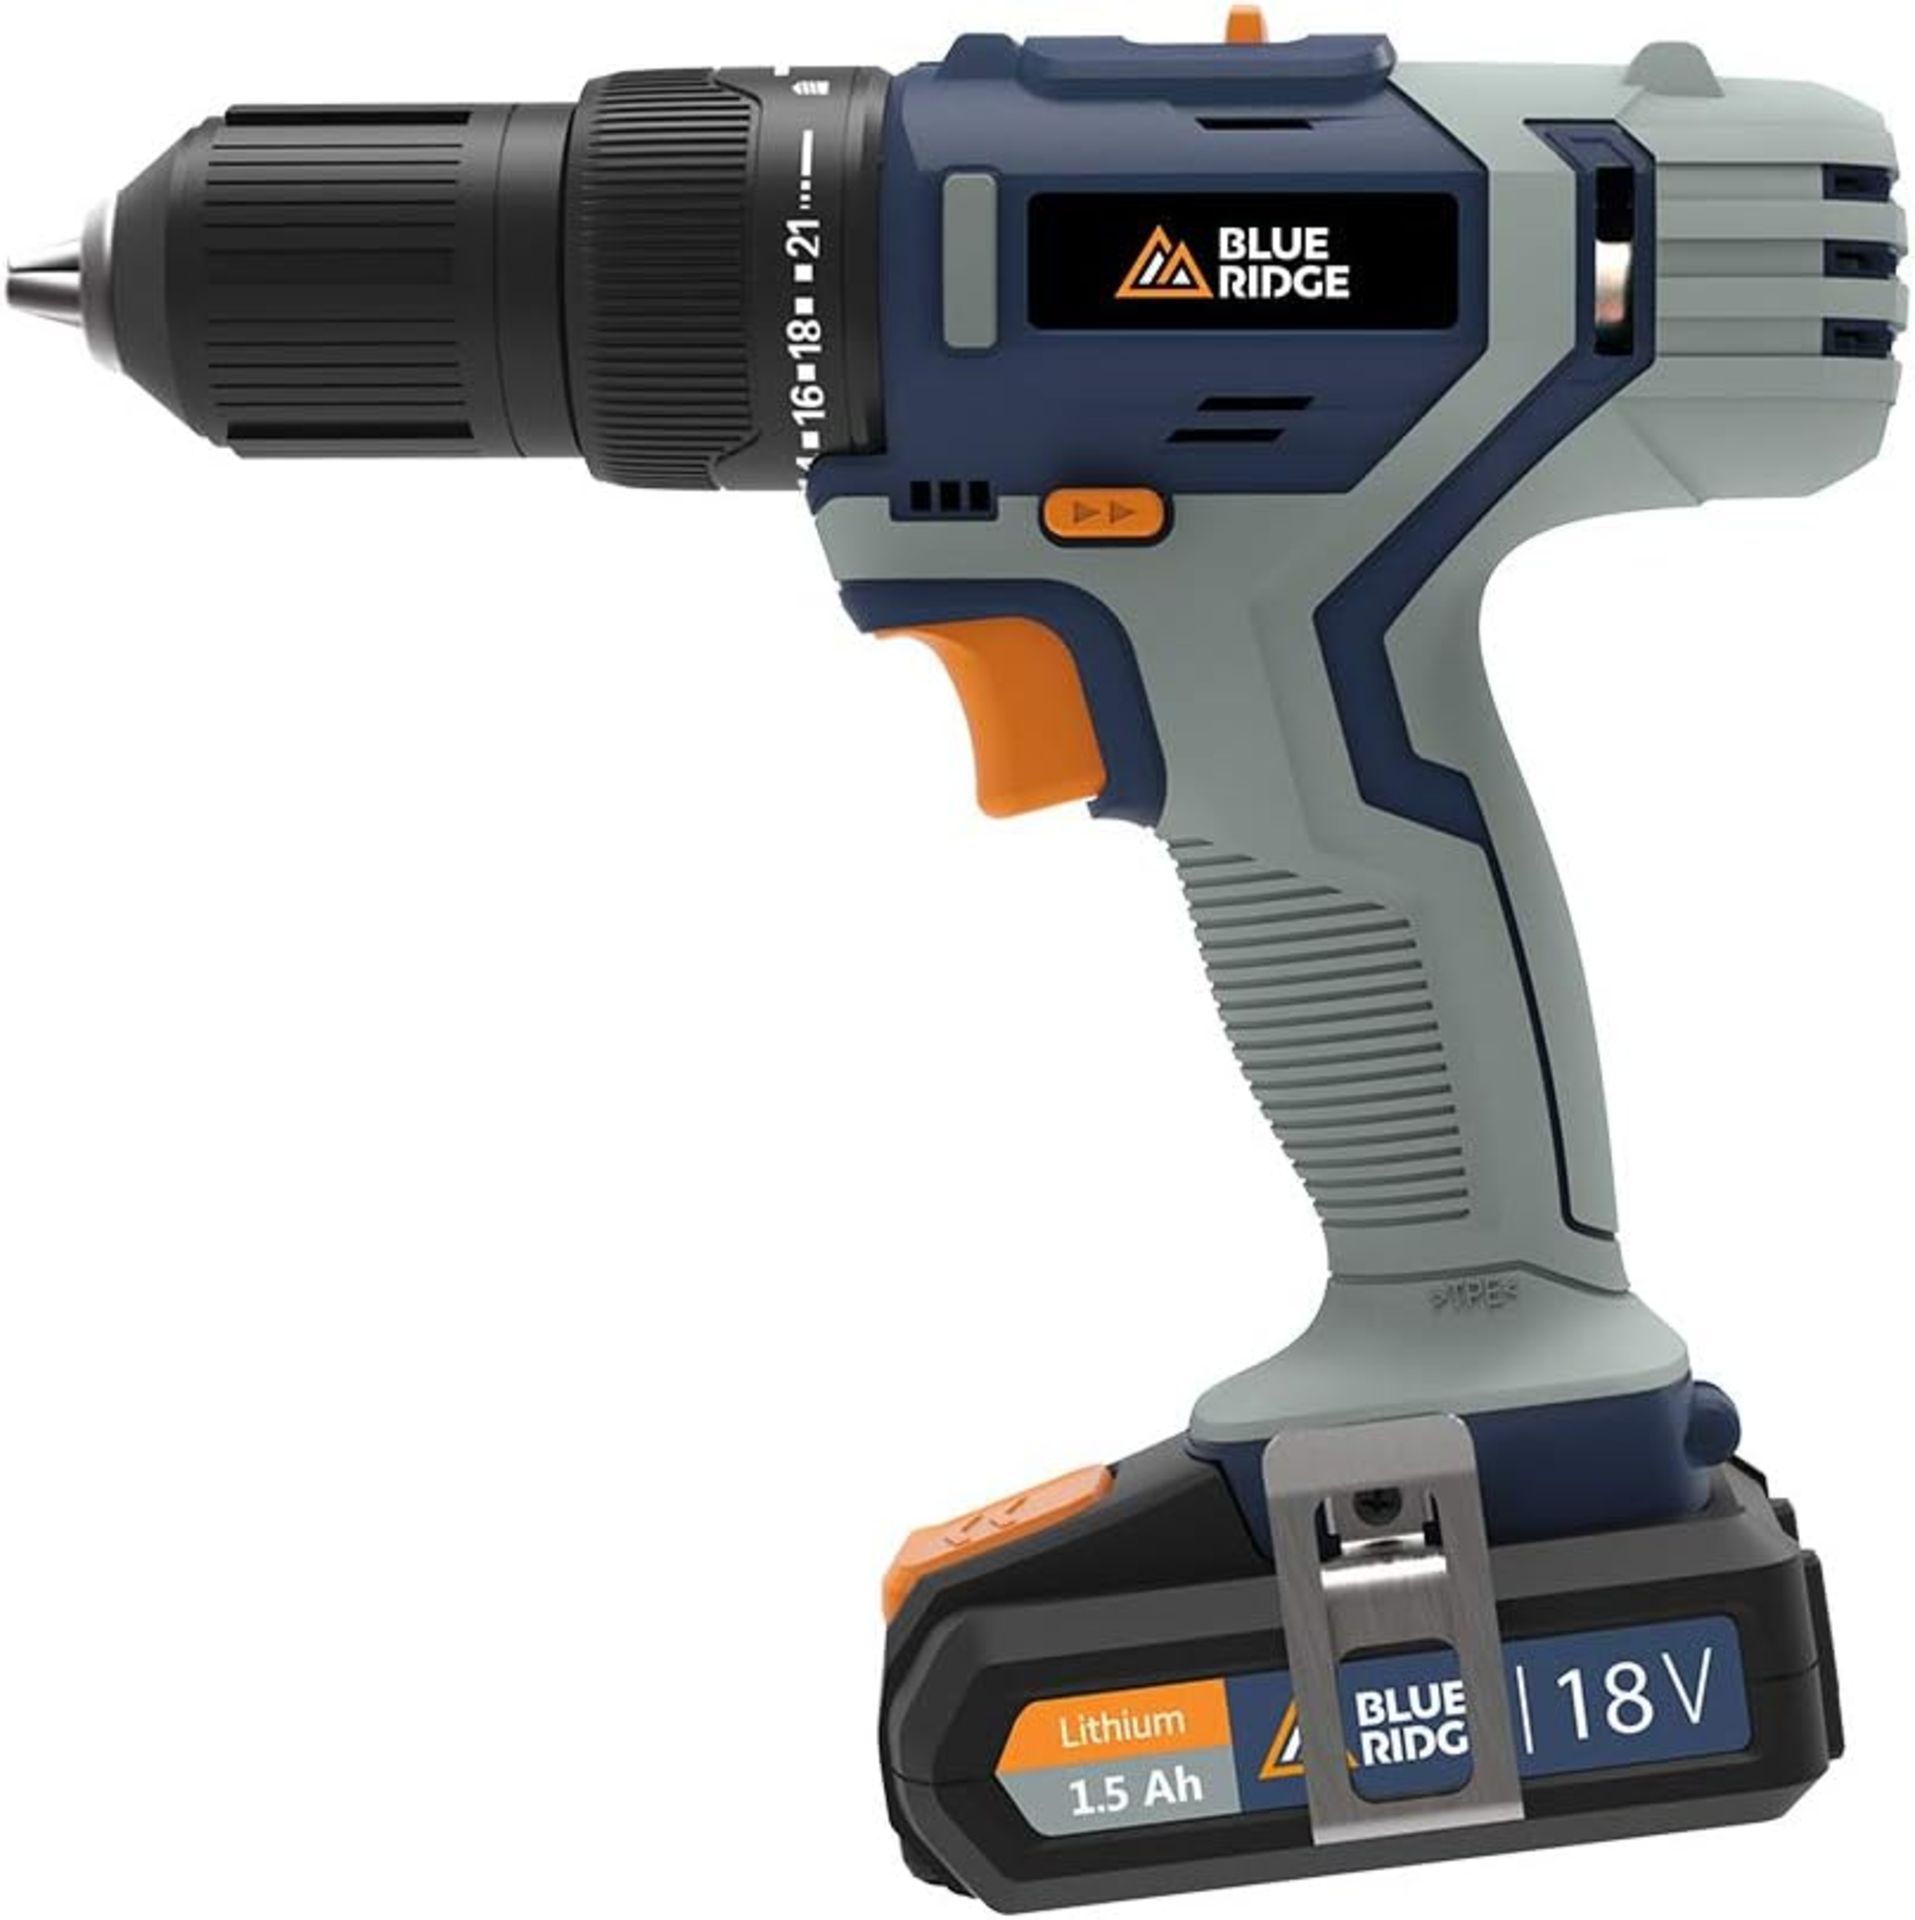 3x NEW & BOXED BLUE RIDGE 18V Cordless Hammer Drill with 2 x 1.5 Ah Li-ion Batteries & 43 Piece - Image 7 of 11